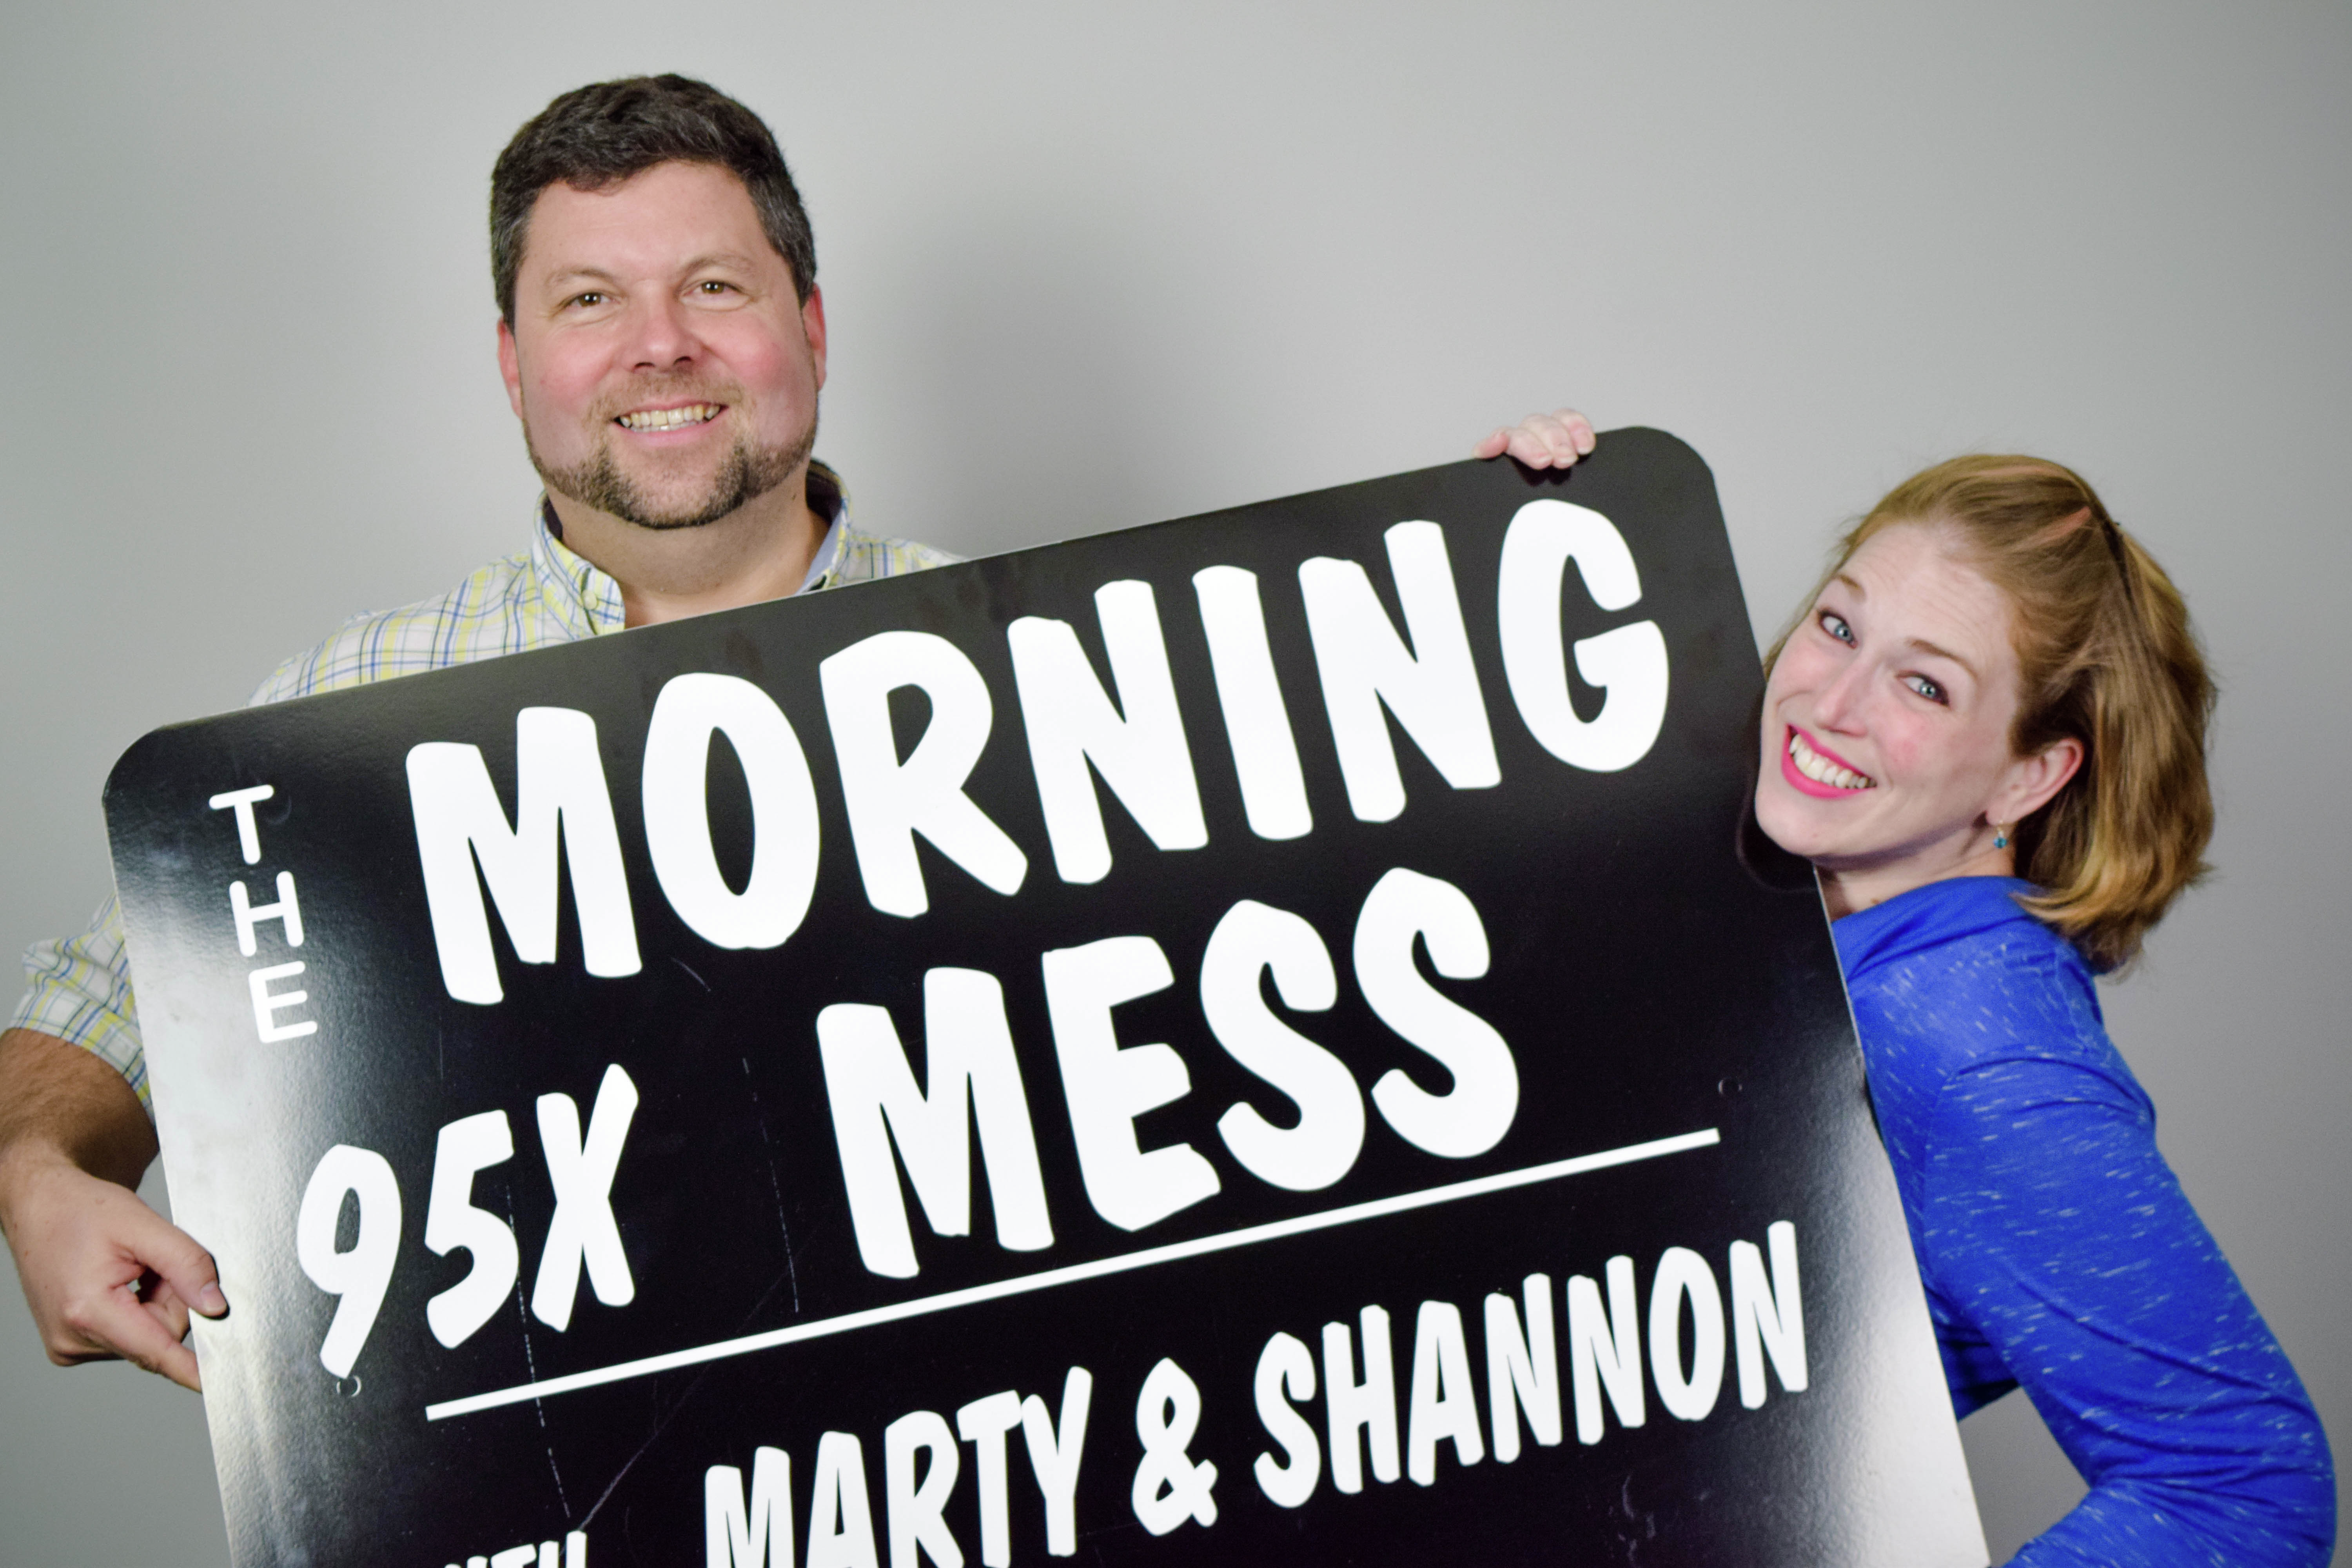 Marty & Shannon talk about a lucky item you have